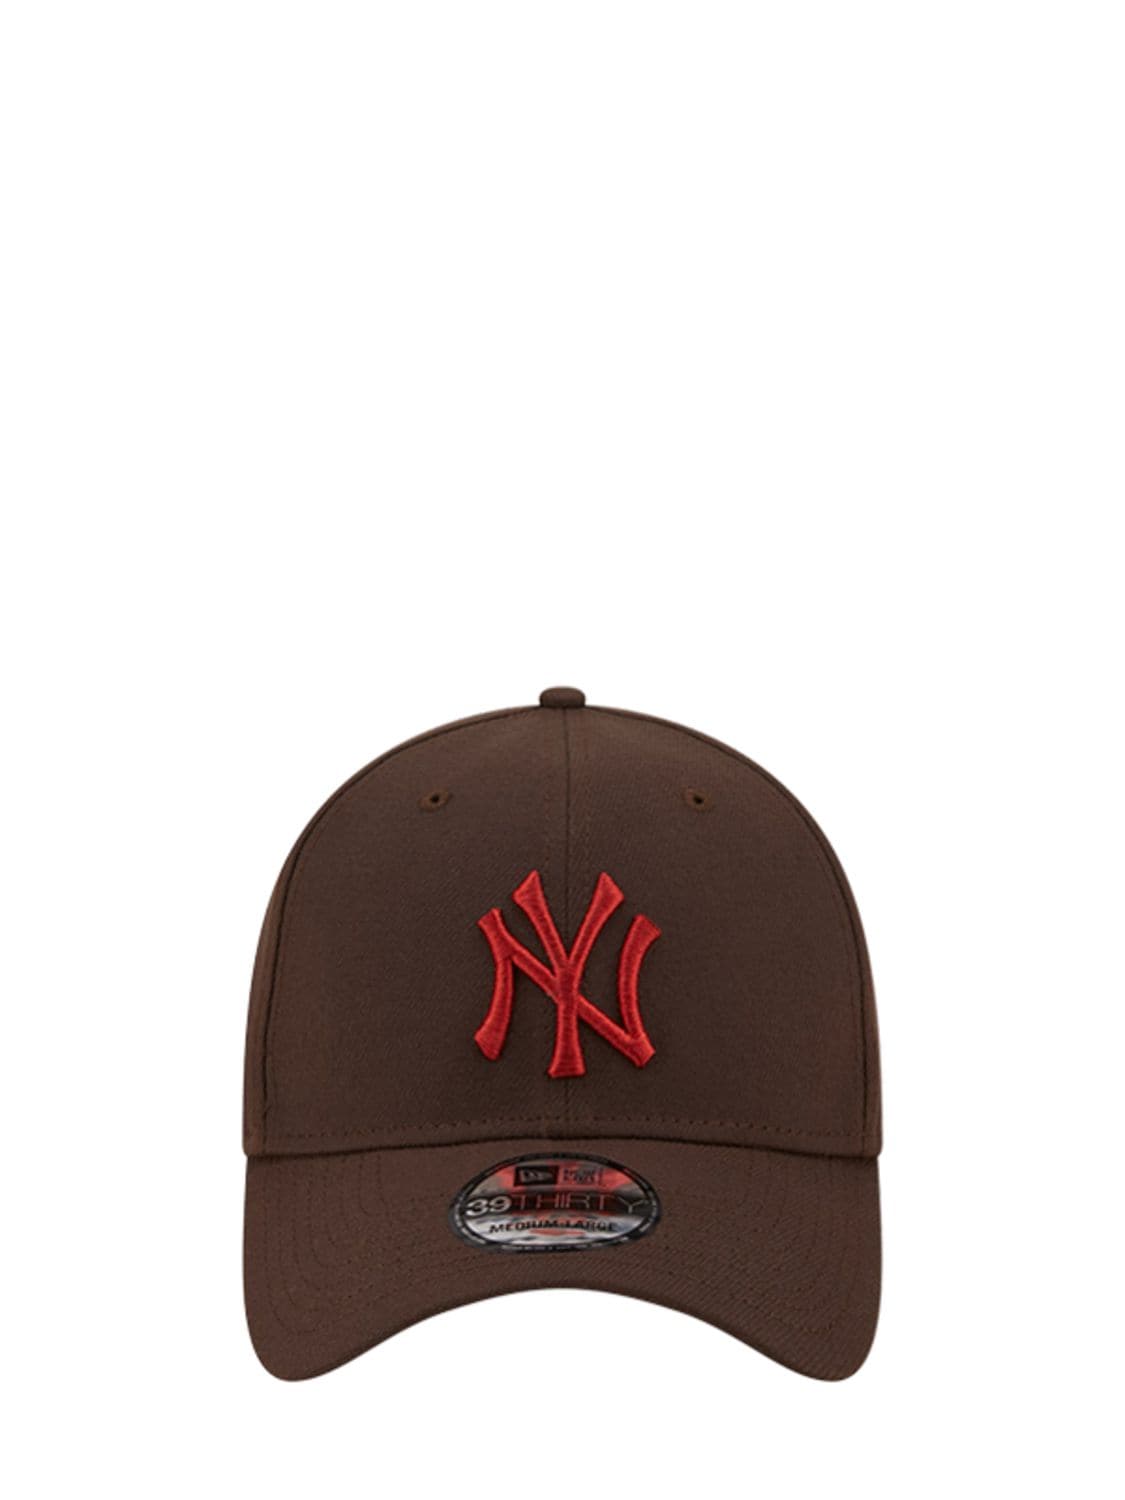 Image of 39thirty Ny League Essential Cap